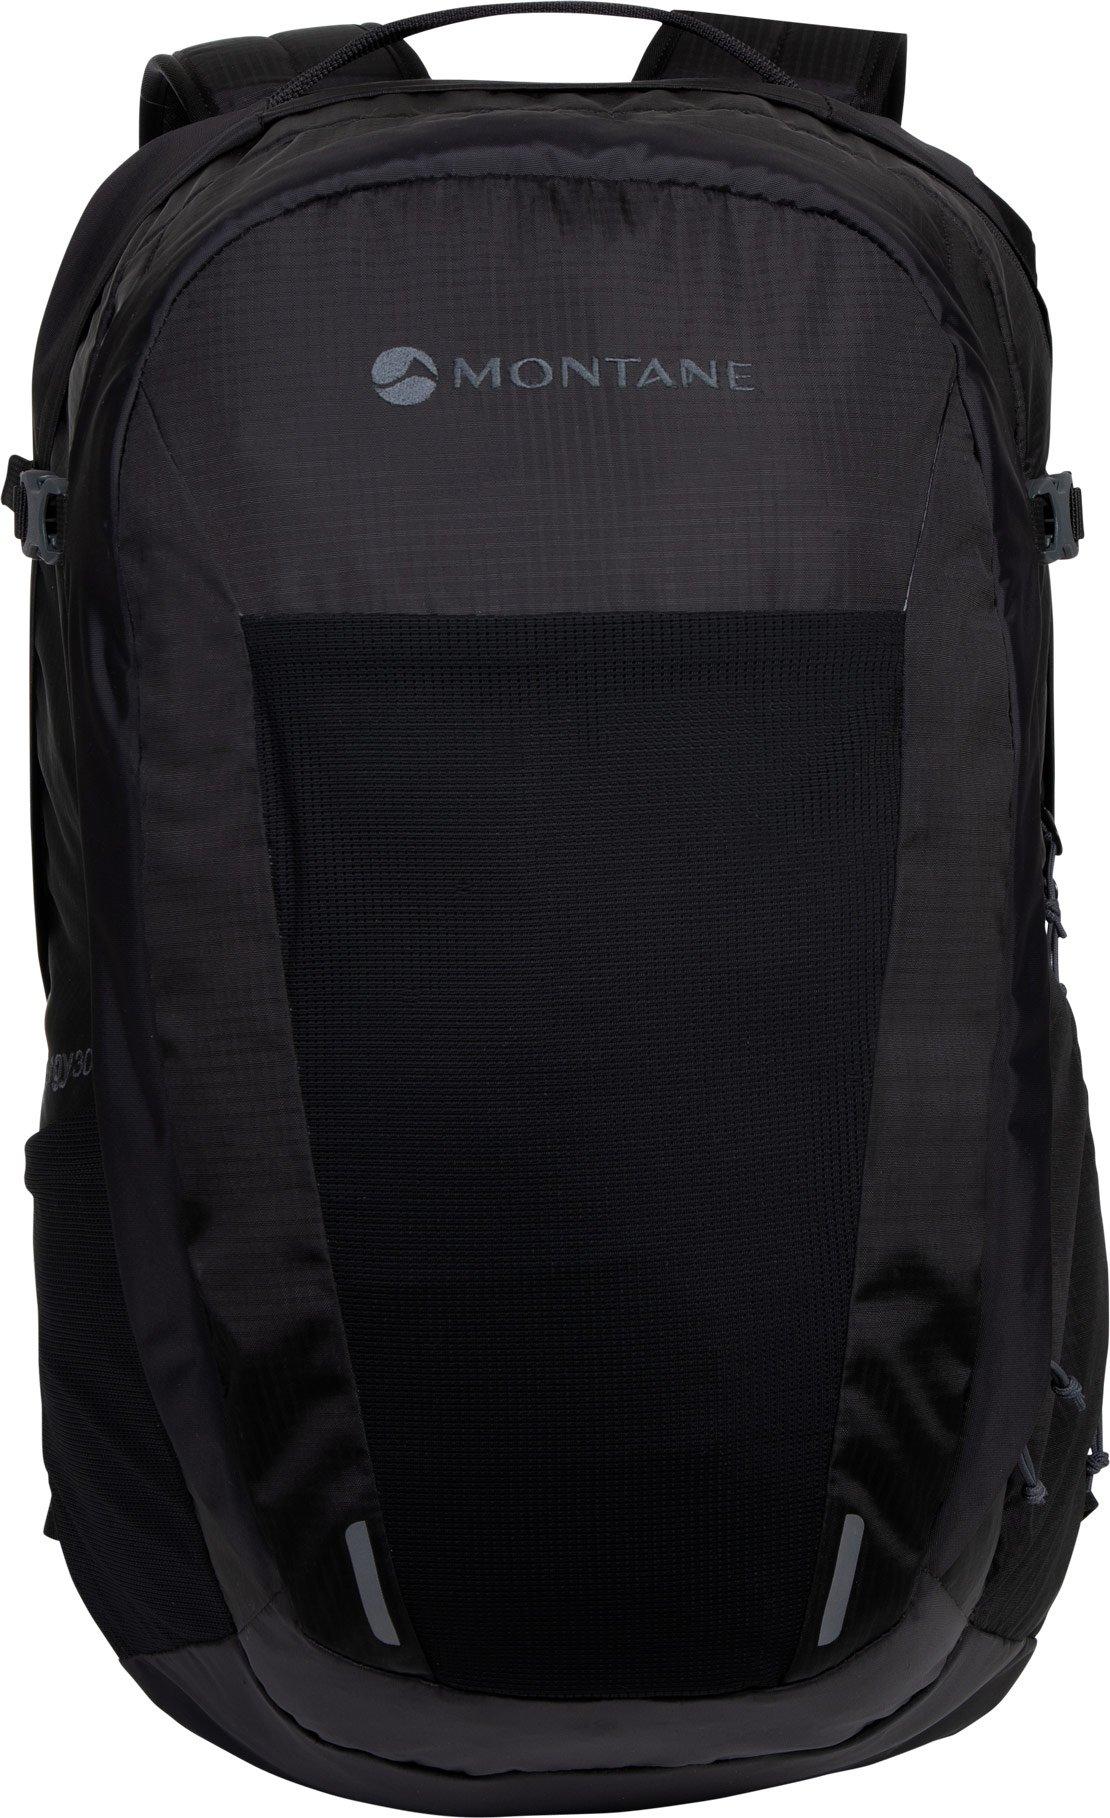 Montane Synergy 30 Daypack Review